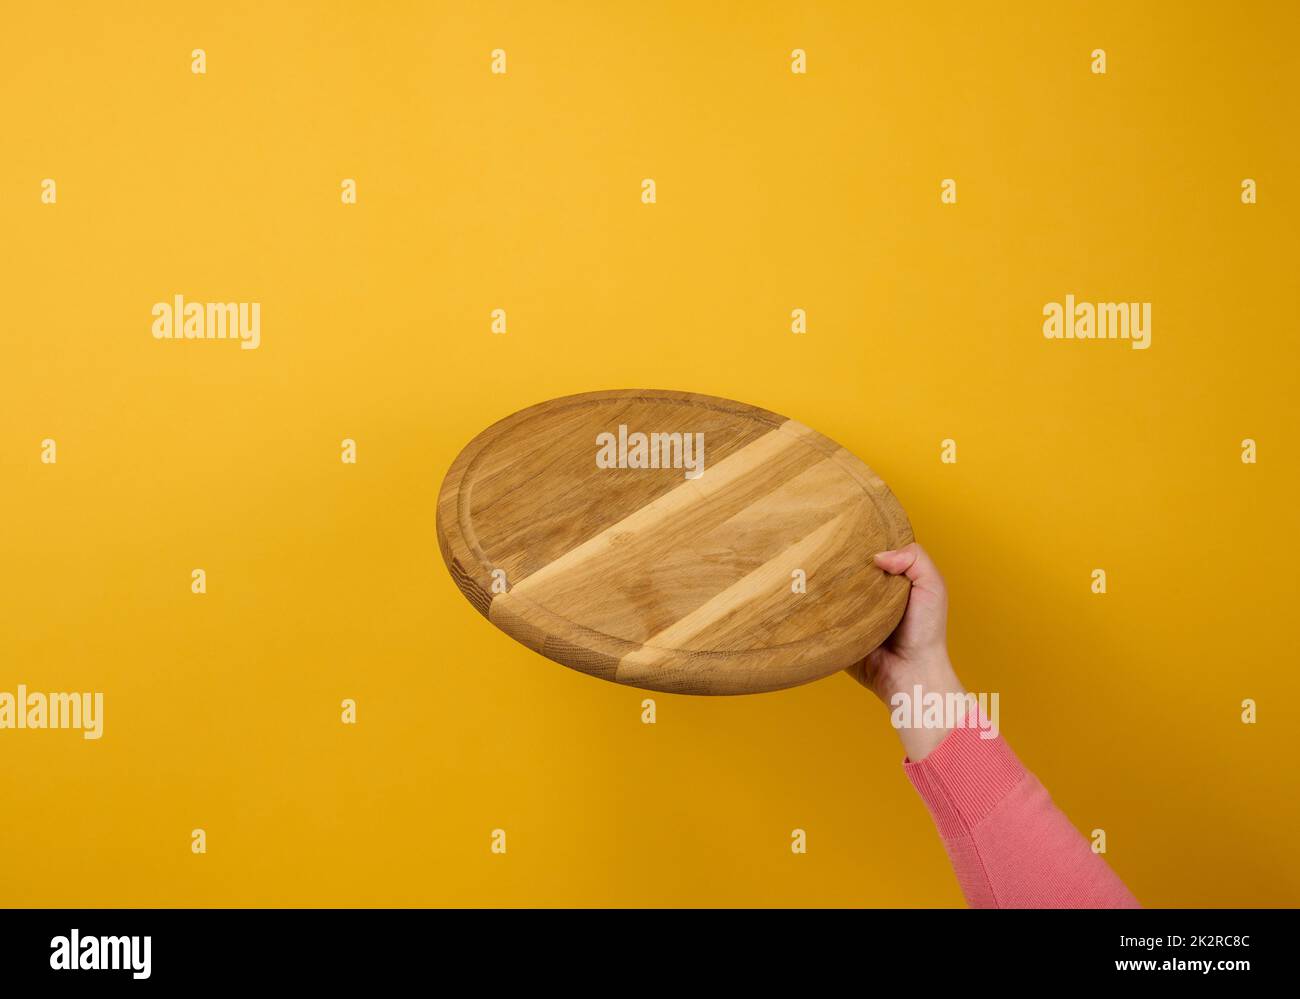 woman holding empty round wooden pizza board in hand, body part  ona  yellow background Stock Photo